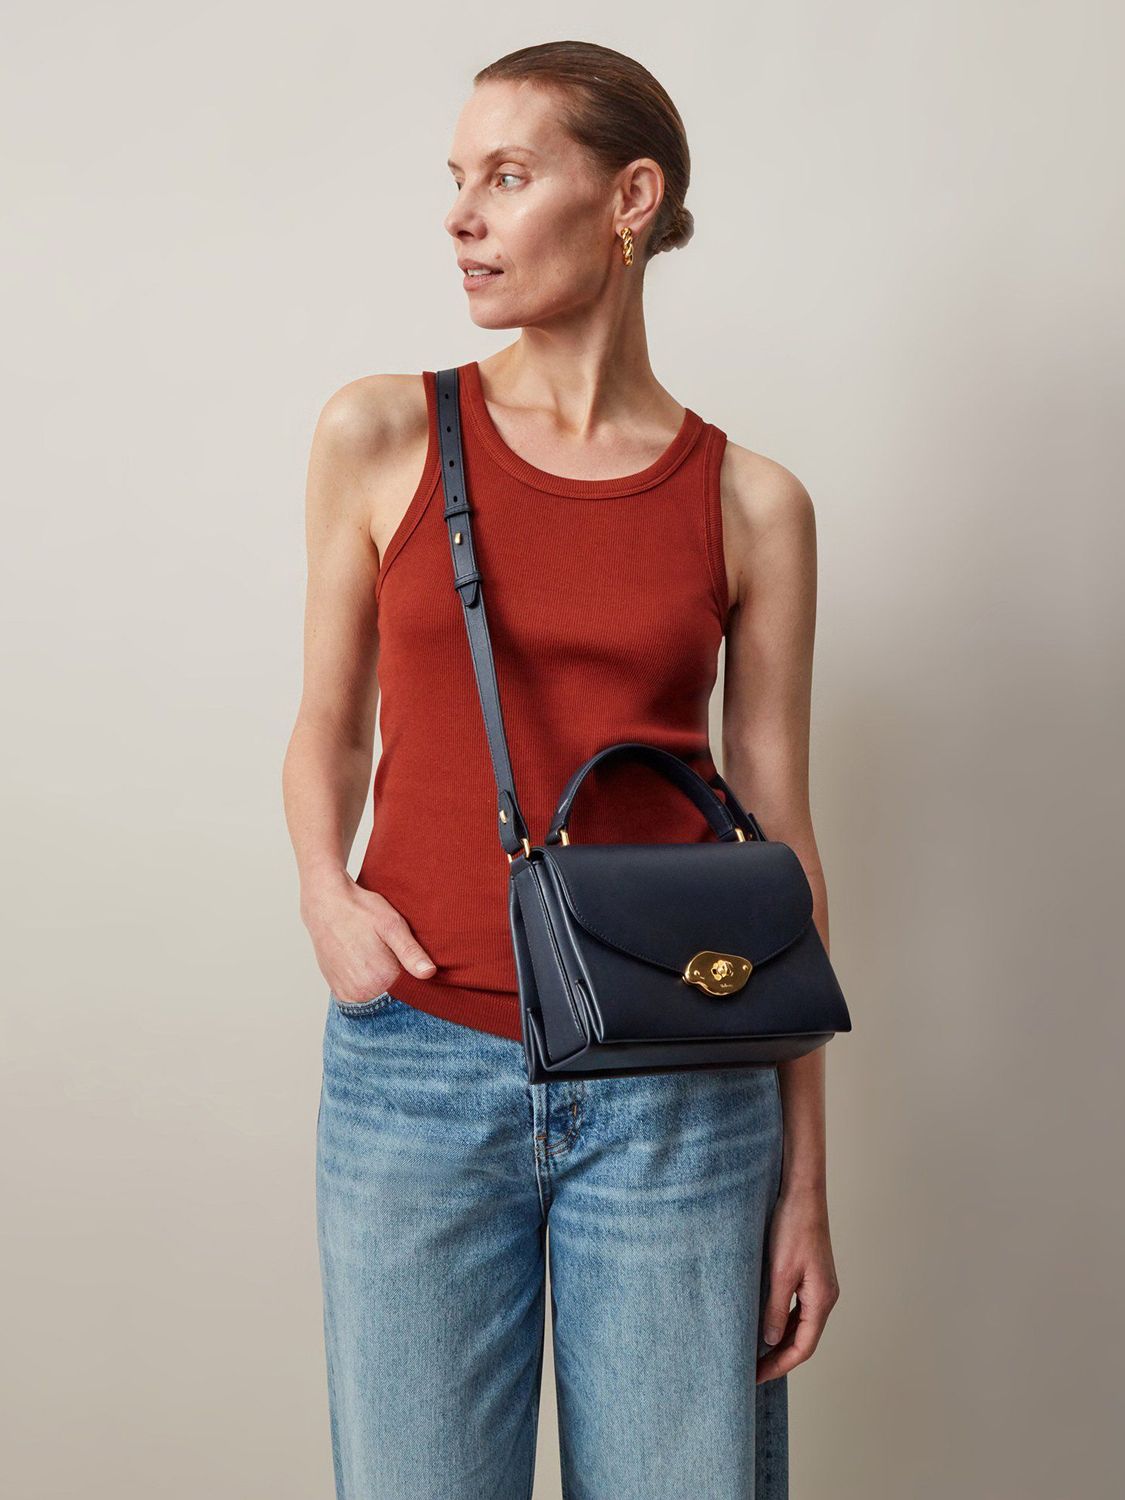 Buy Mulberry Lana High Gloss Leather Top Handle Bag, Night Sky Online at johnlewis.com